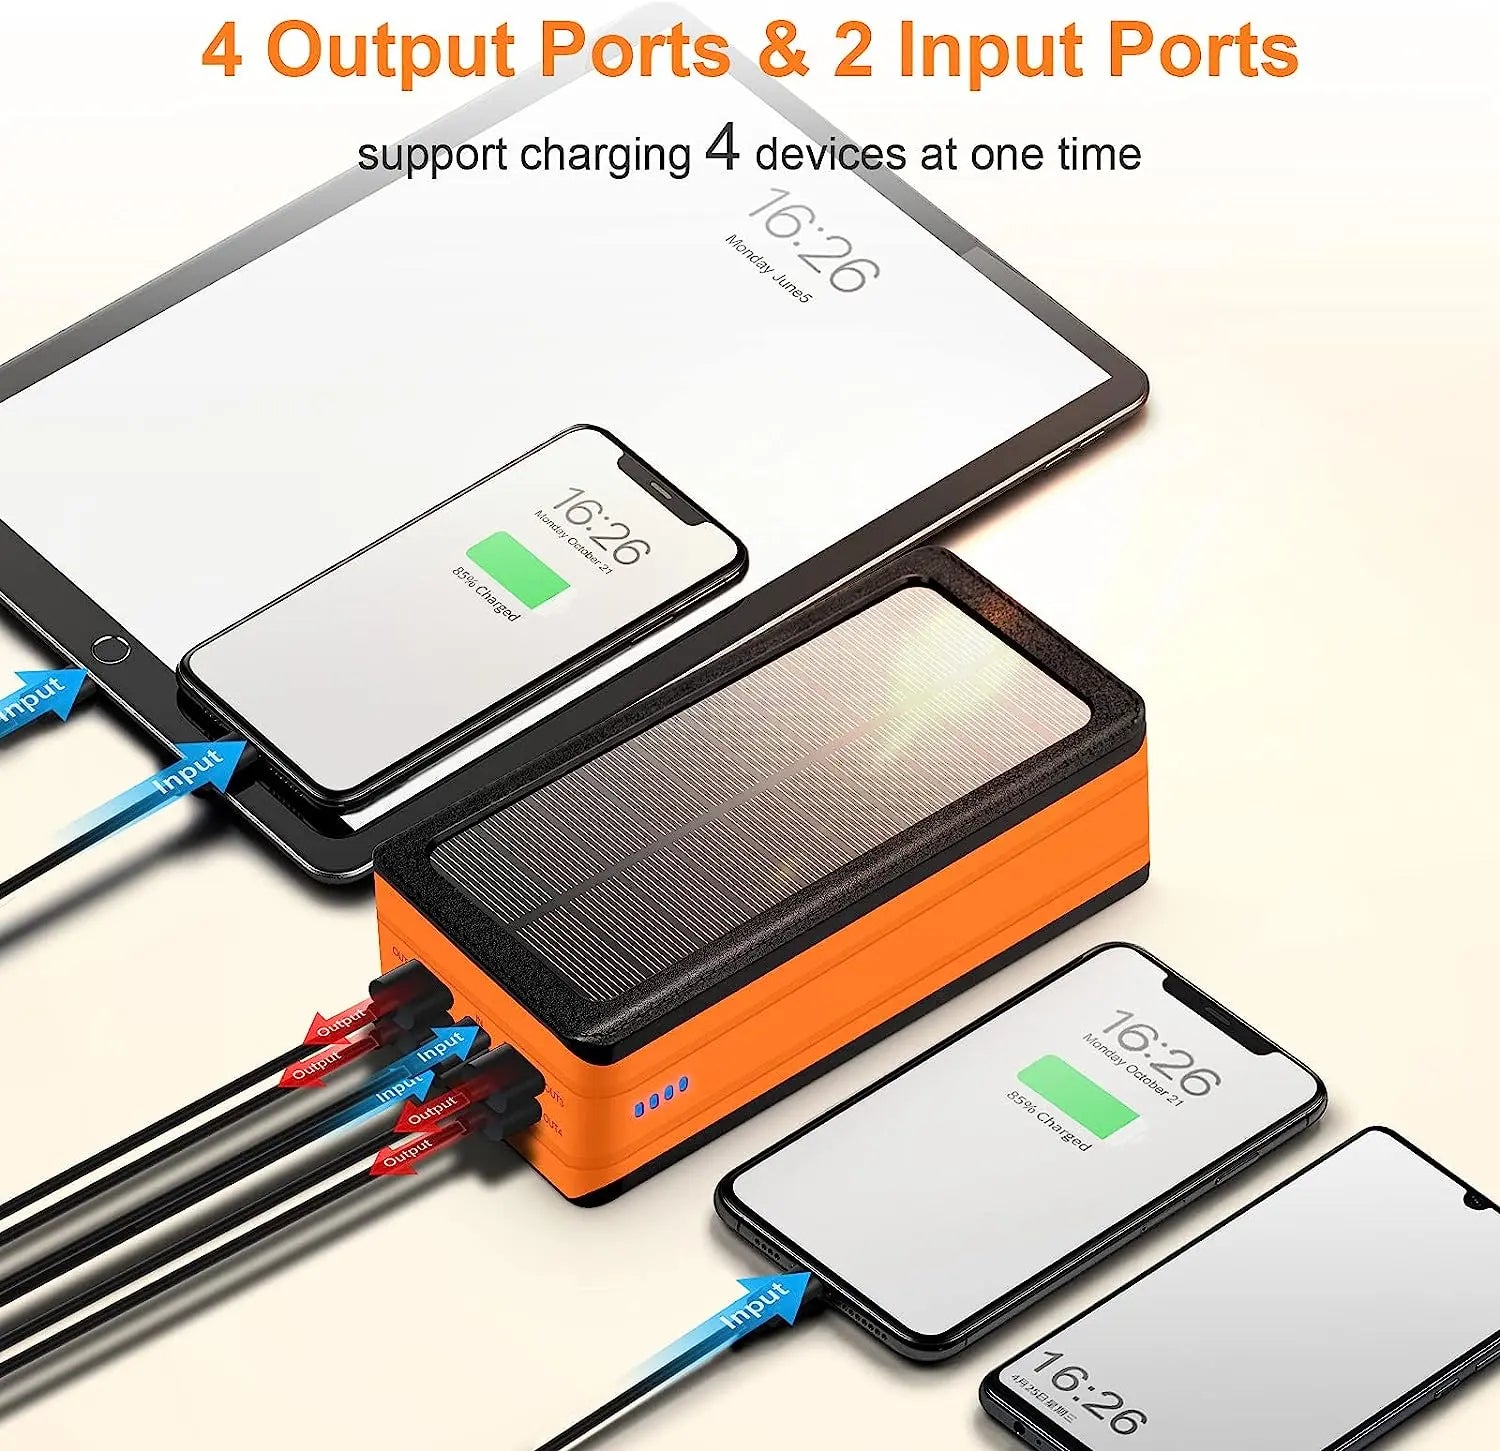 Solar Power Bank 50000Mah, Portable Solar Phone Charger with Flashlight, 4  Output Ports, 2 Input Ports, Solar Battery Bank Compatible with Iphone for